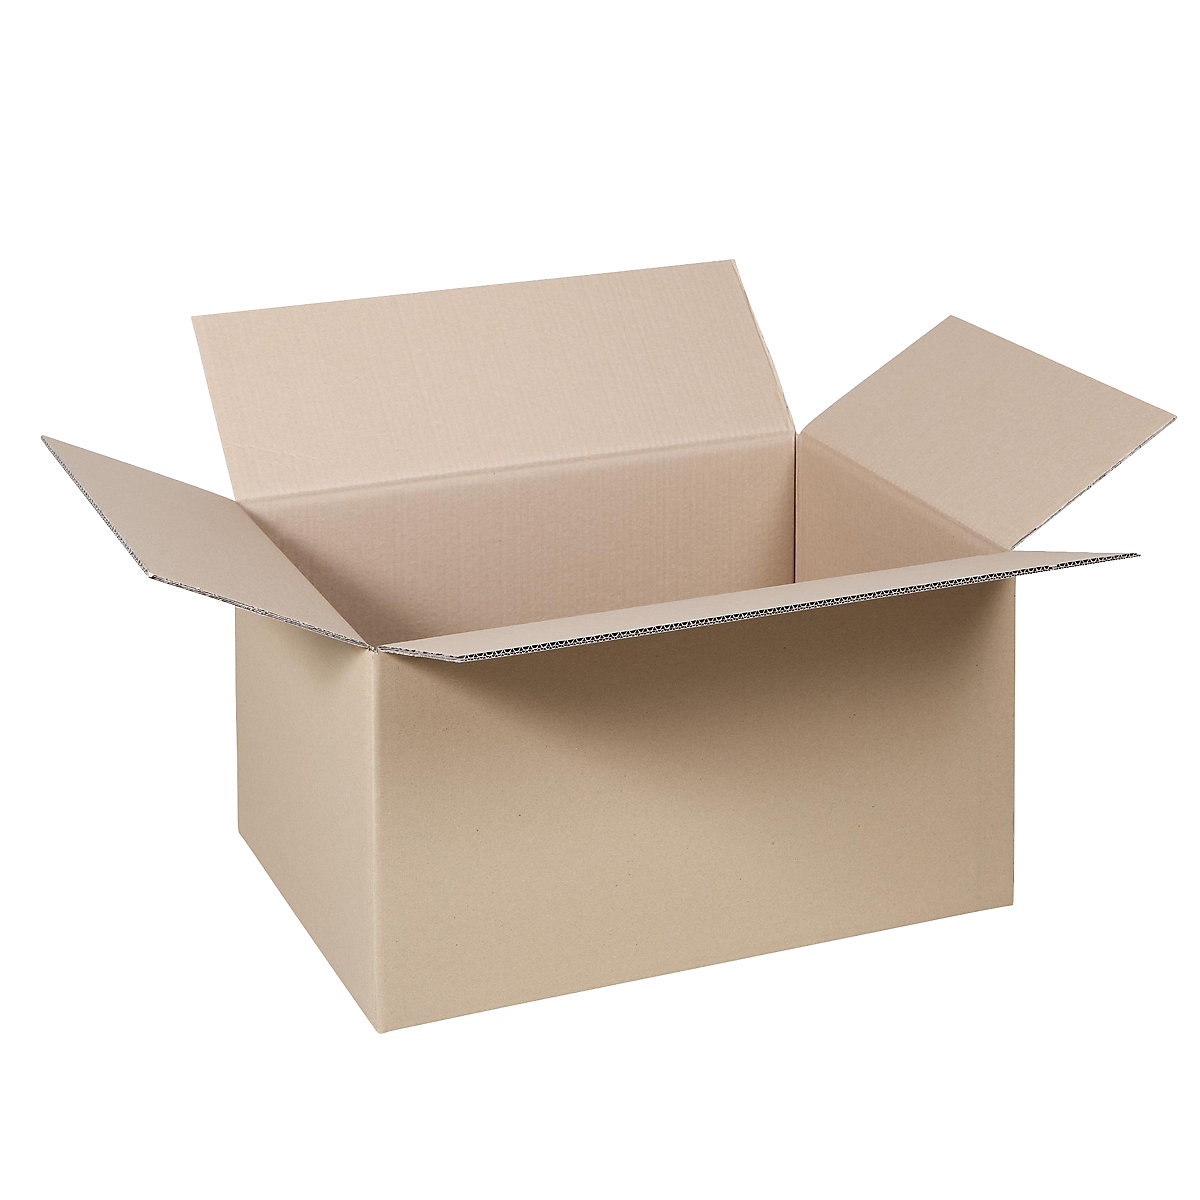 Folding cardboard box, FEFCO 0201, made of double fluted cardboard, internal dimensions 480 x 330 x 300 mm, 2.3 BC, pack of 100-3